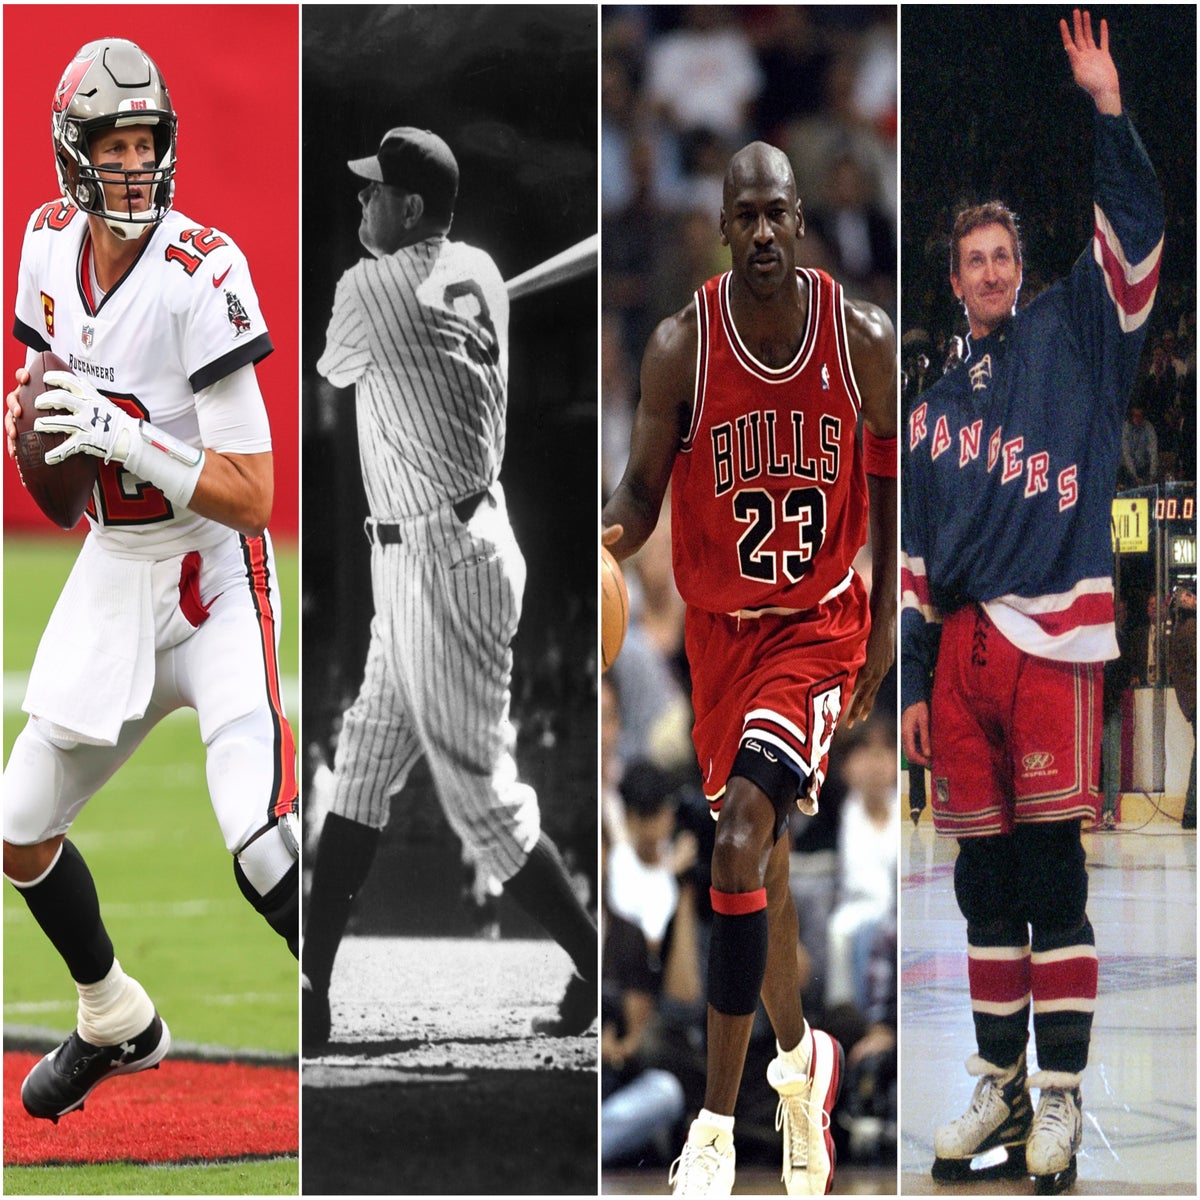 Gretzky and Jordan were different and similiar at same time